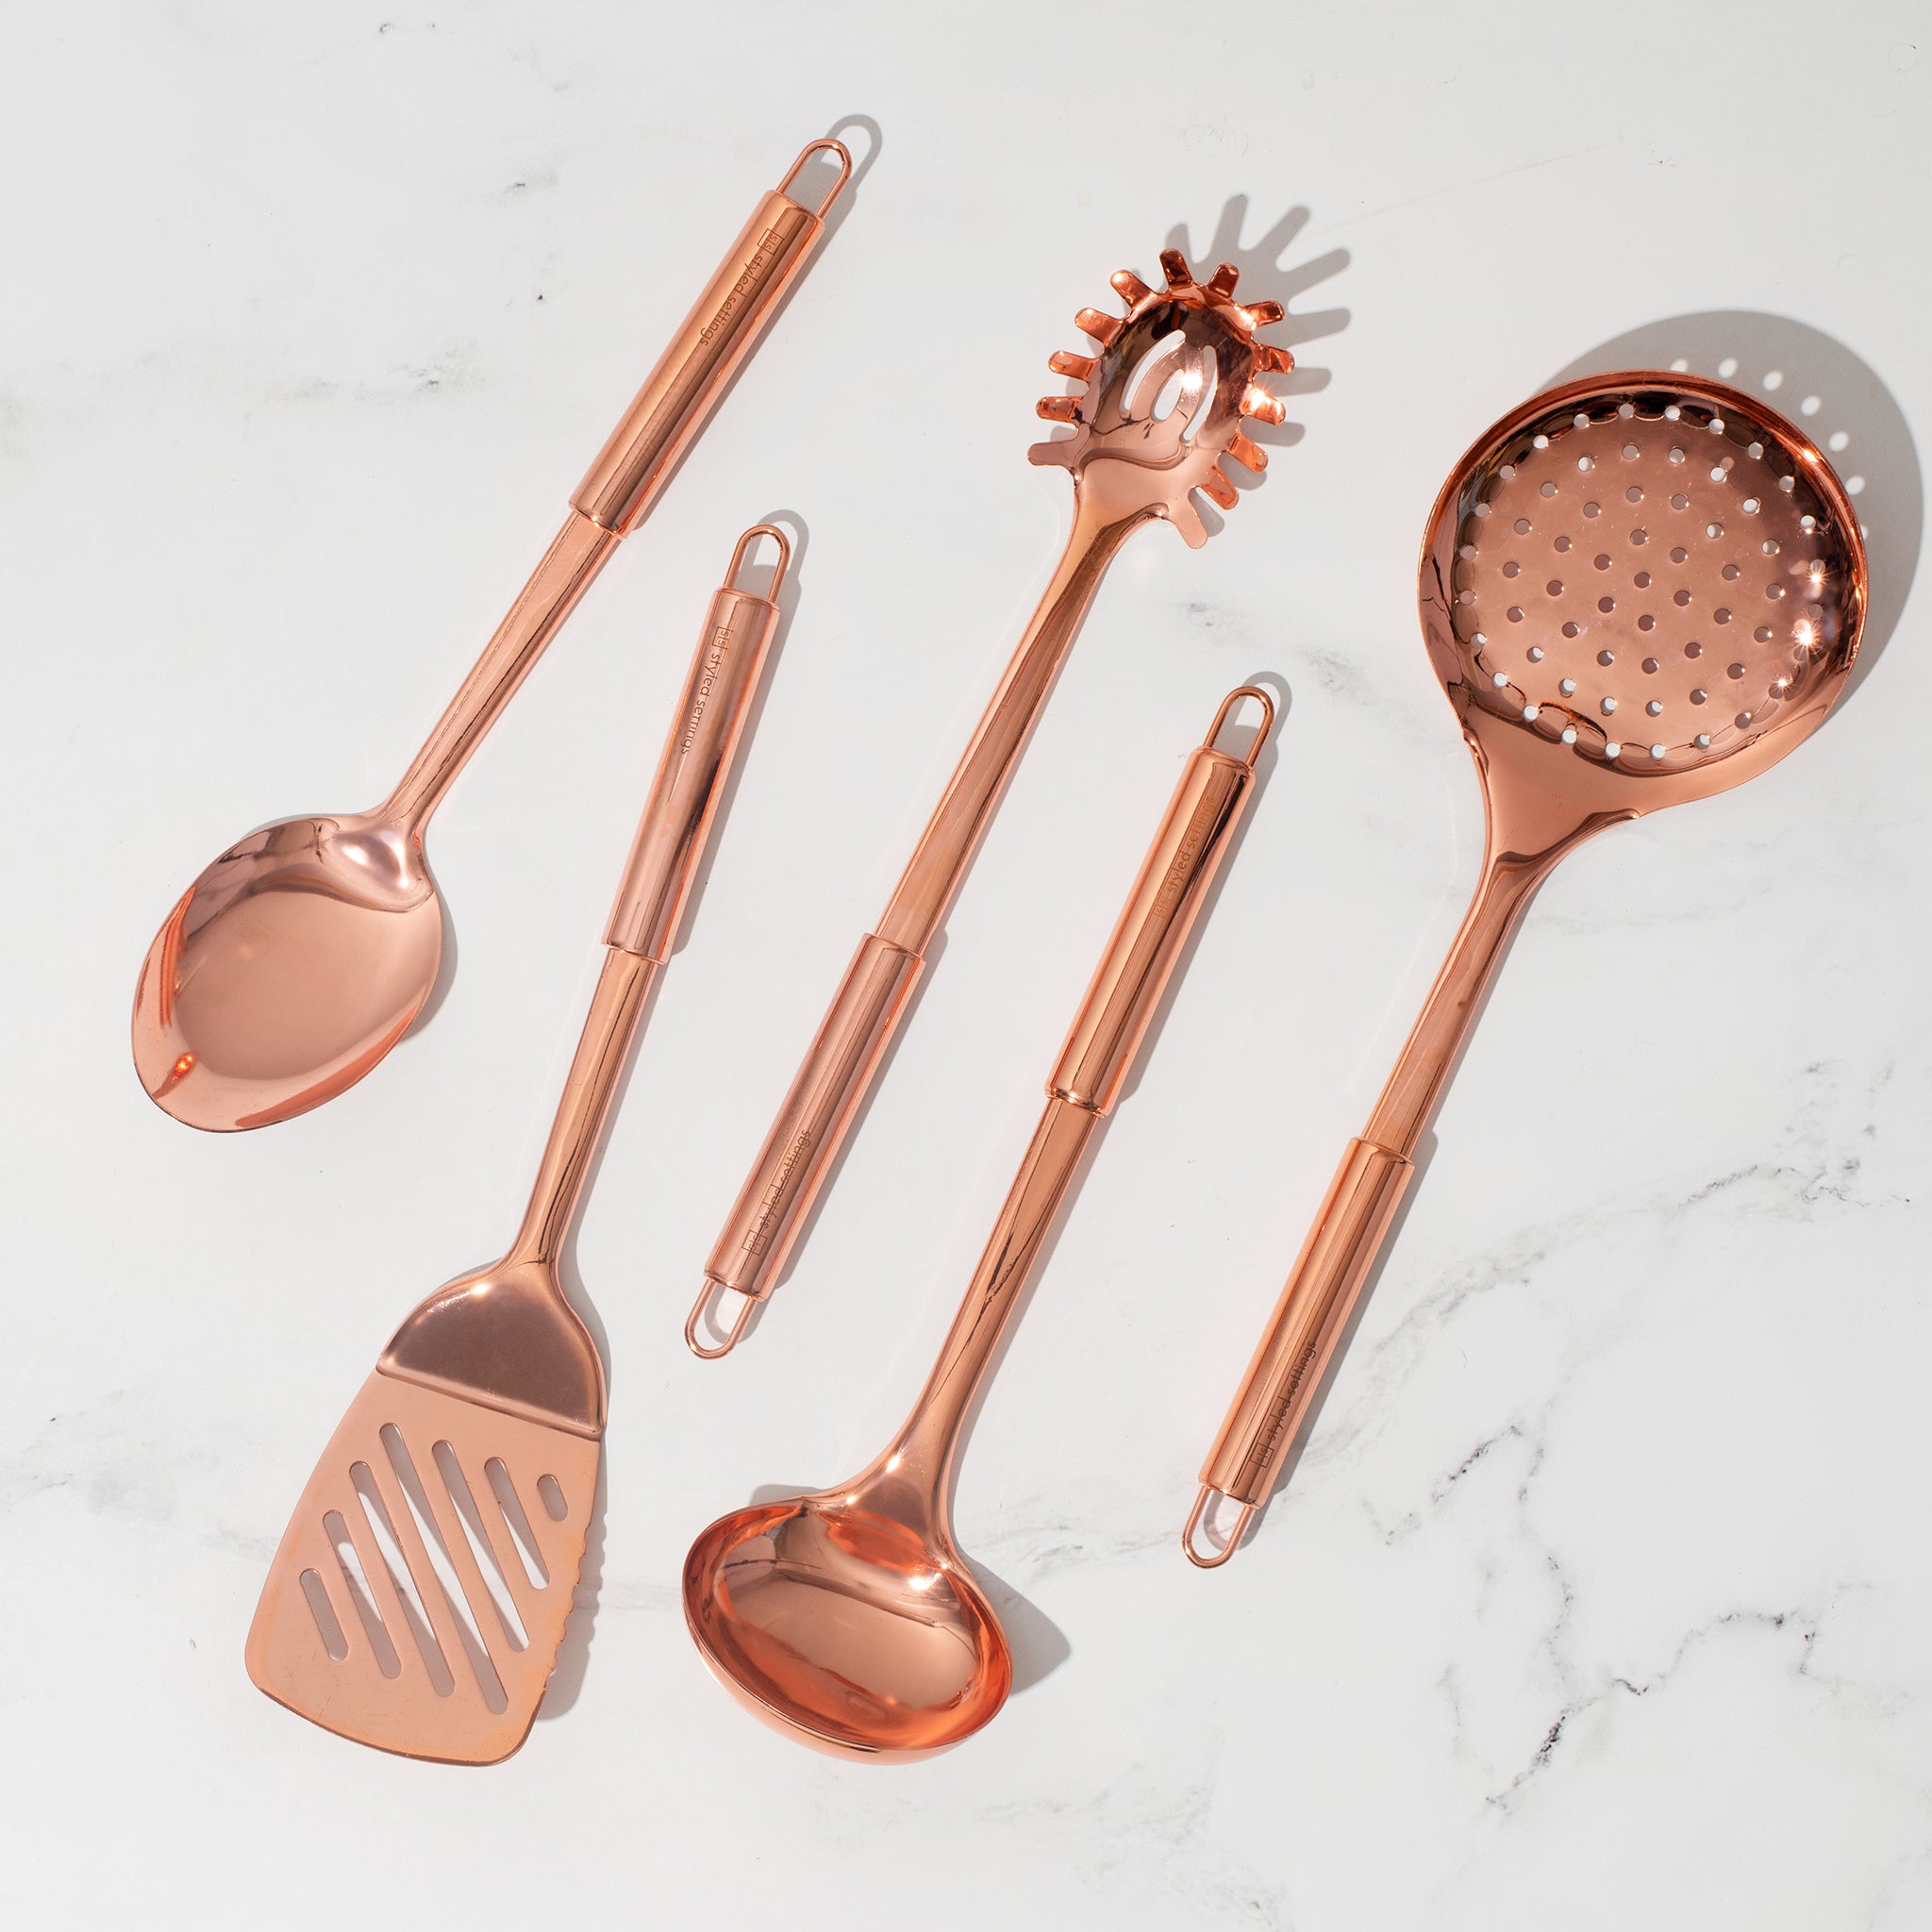 Styled Settings Copper Cooking Utensils for Cooking/Serving, Rose Gold Kitchen Utensils -Stainless Steel Copper Serving Utensils Set 5